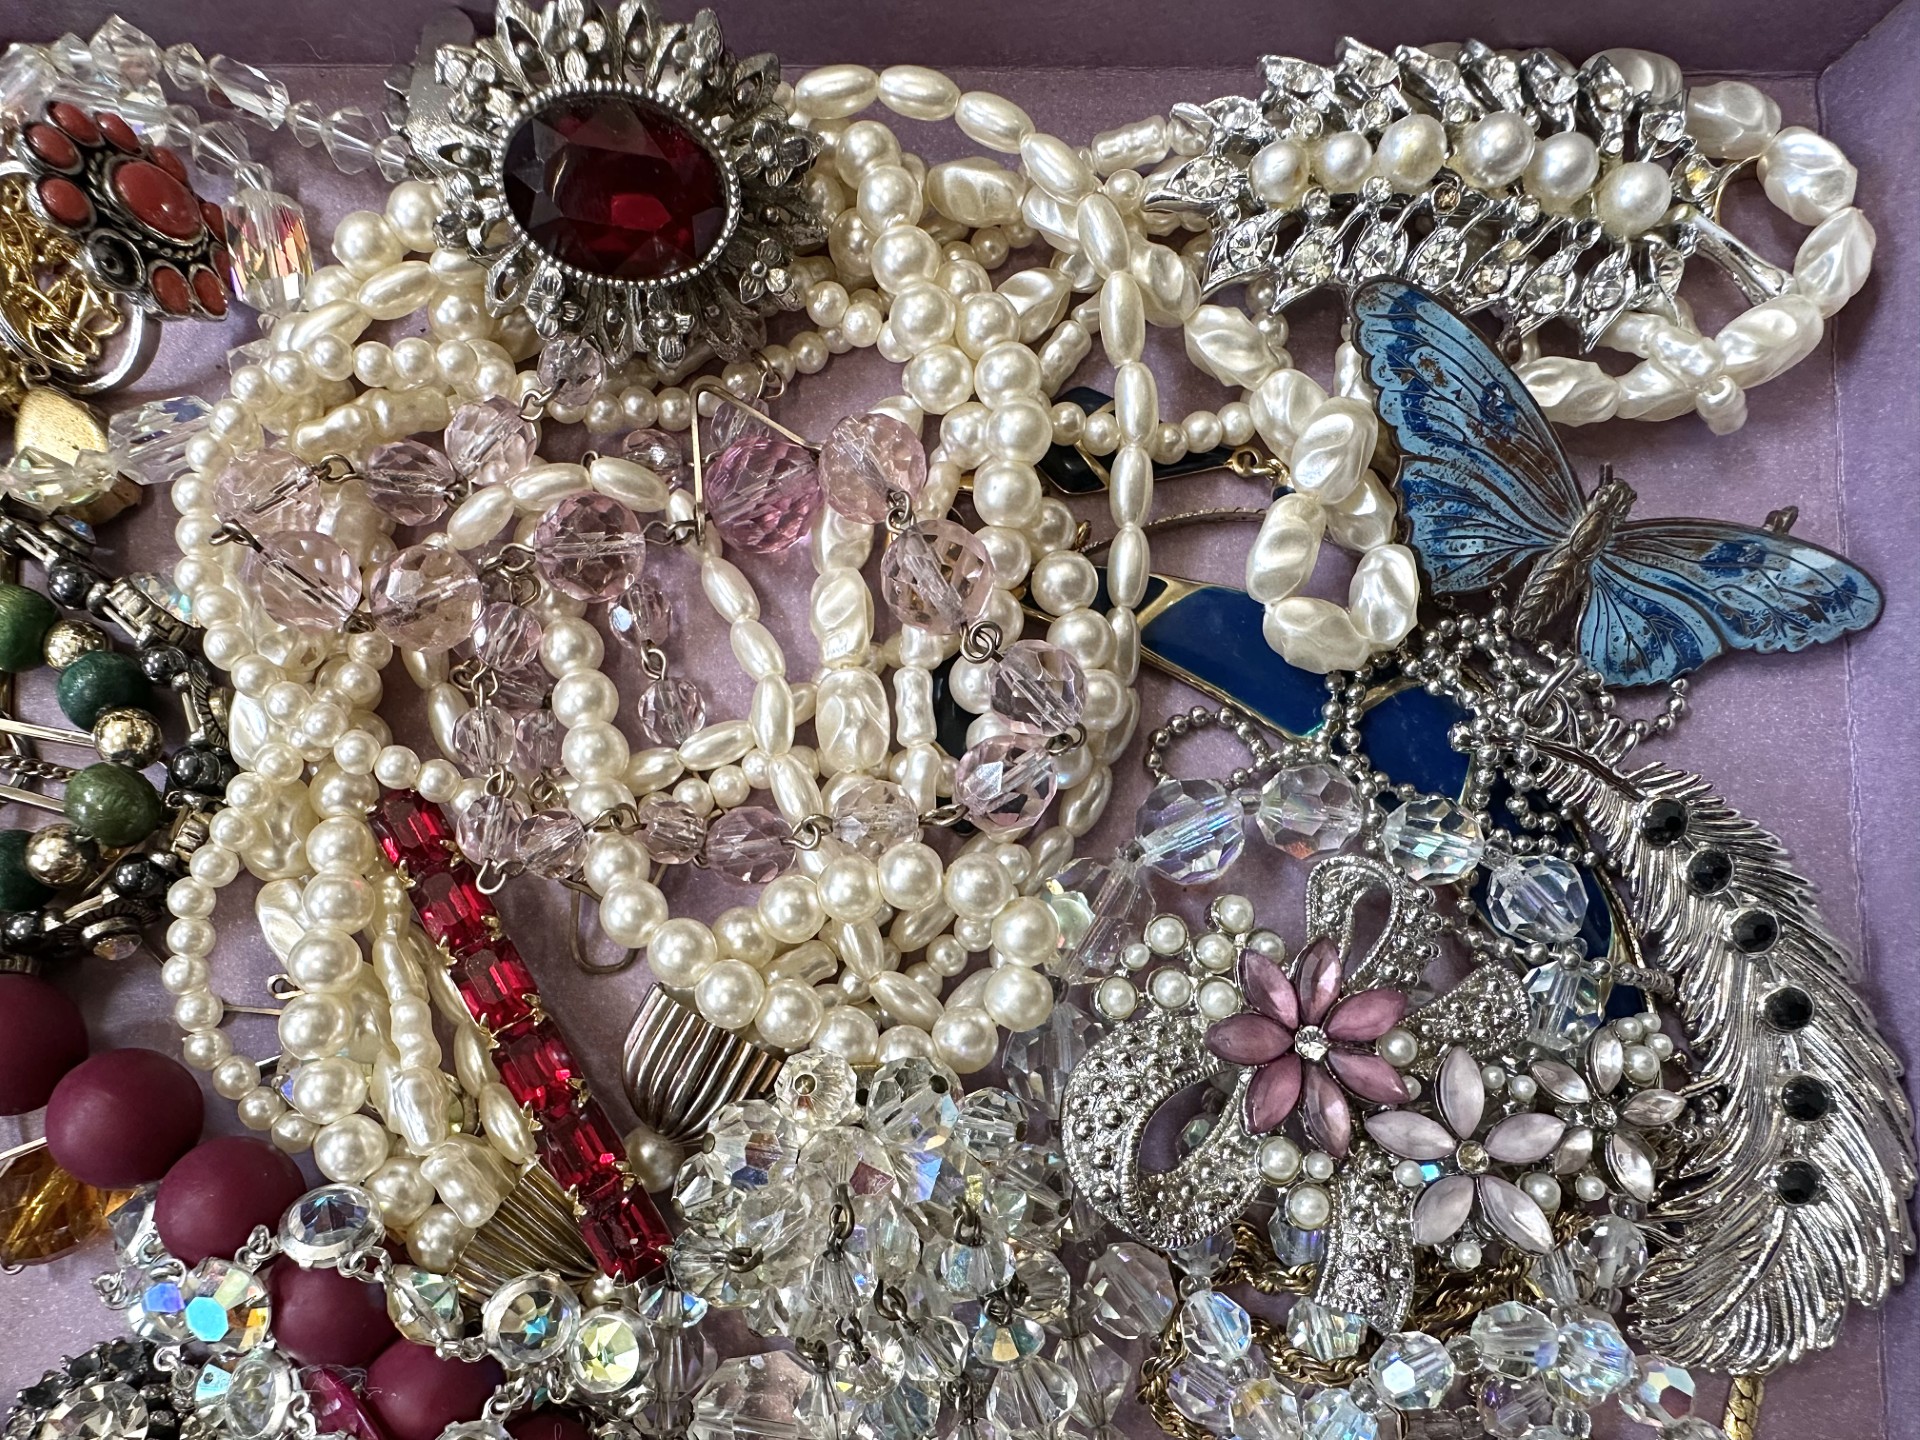 Collection of Costume Jewellery, comprising bracelets, brooches, necklaces, beads, earrings, etc. - Image 4 of 4